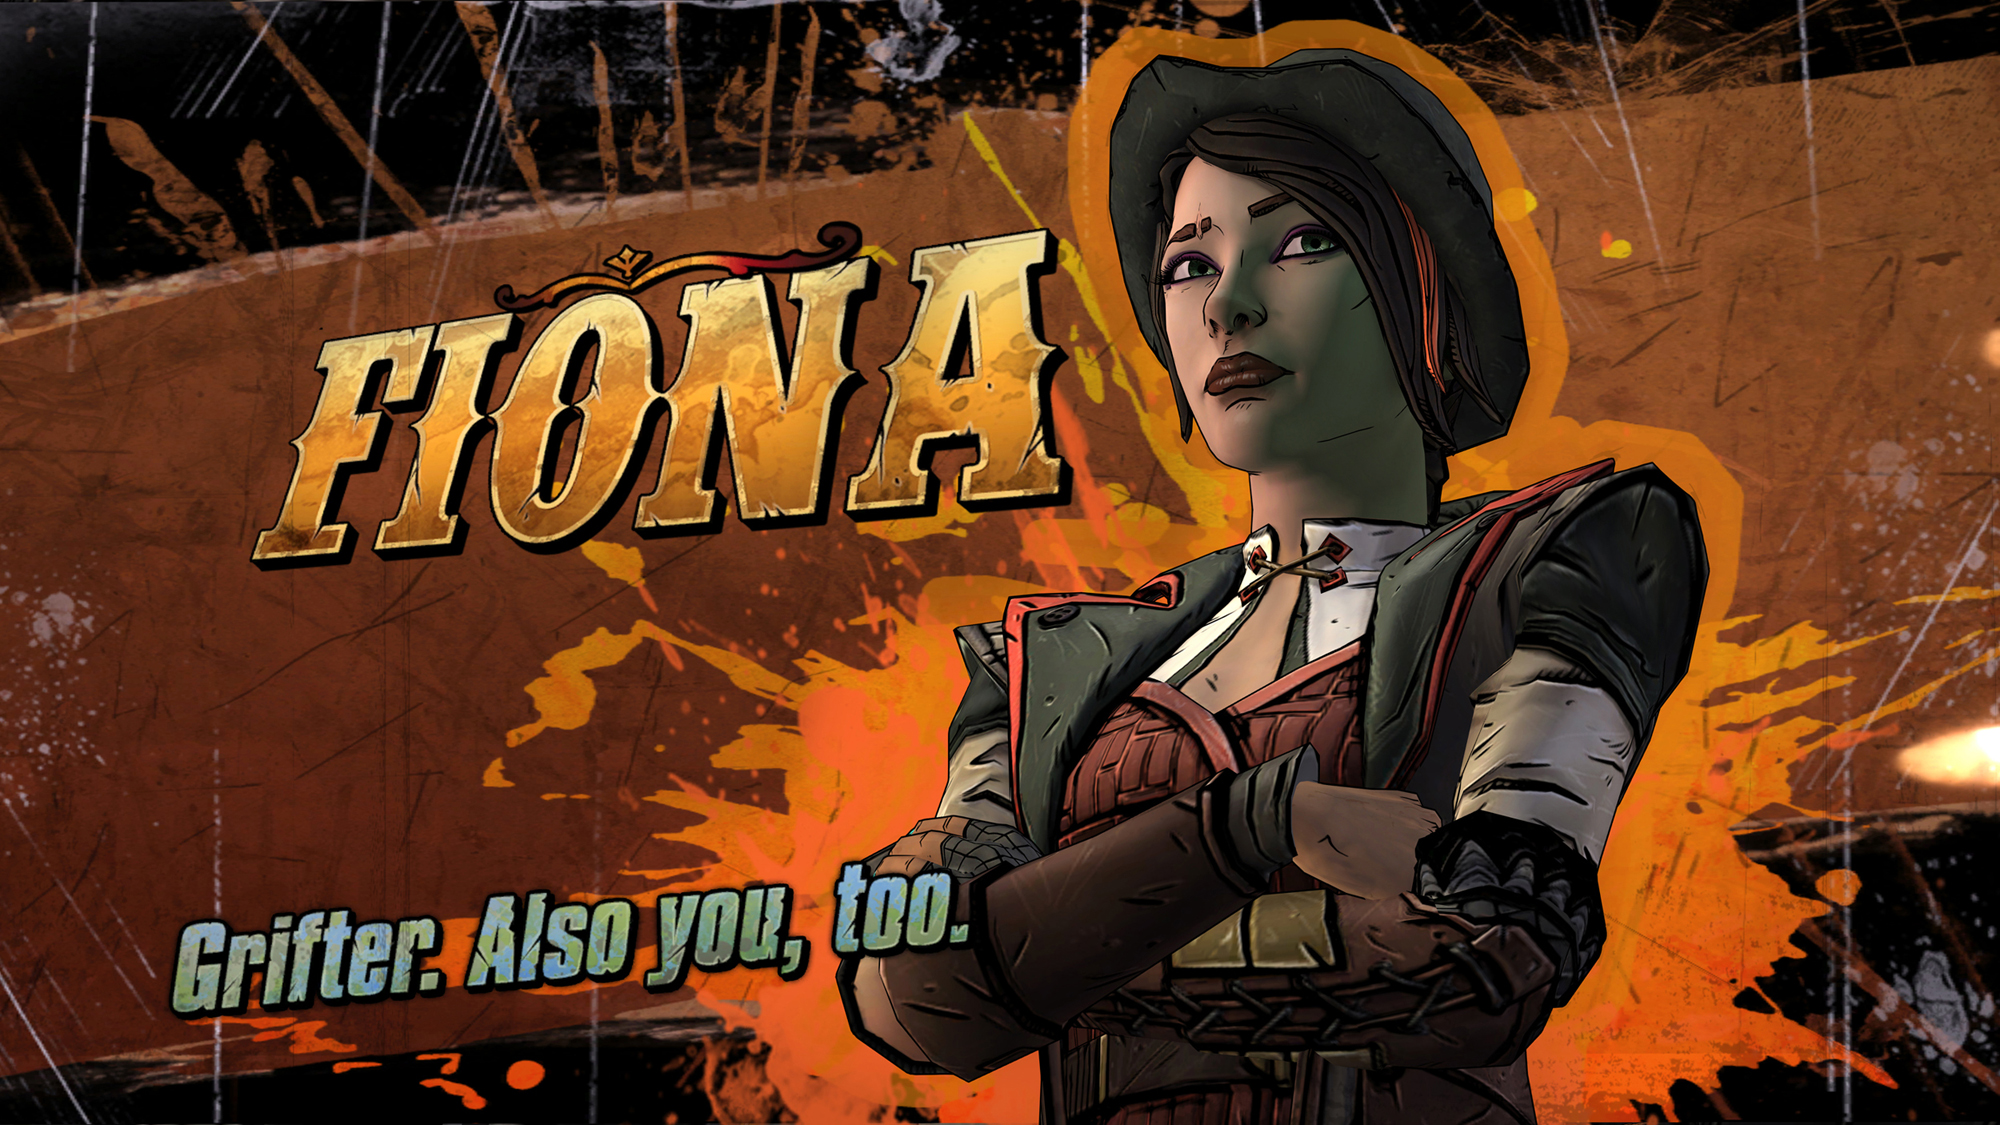 Tales From the Borderlands E3 #2